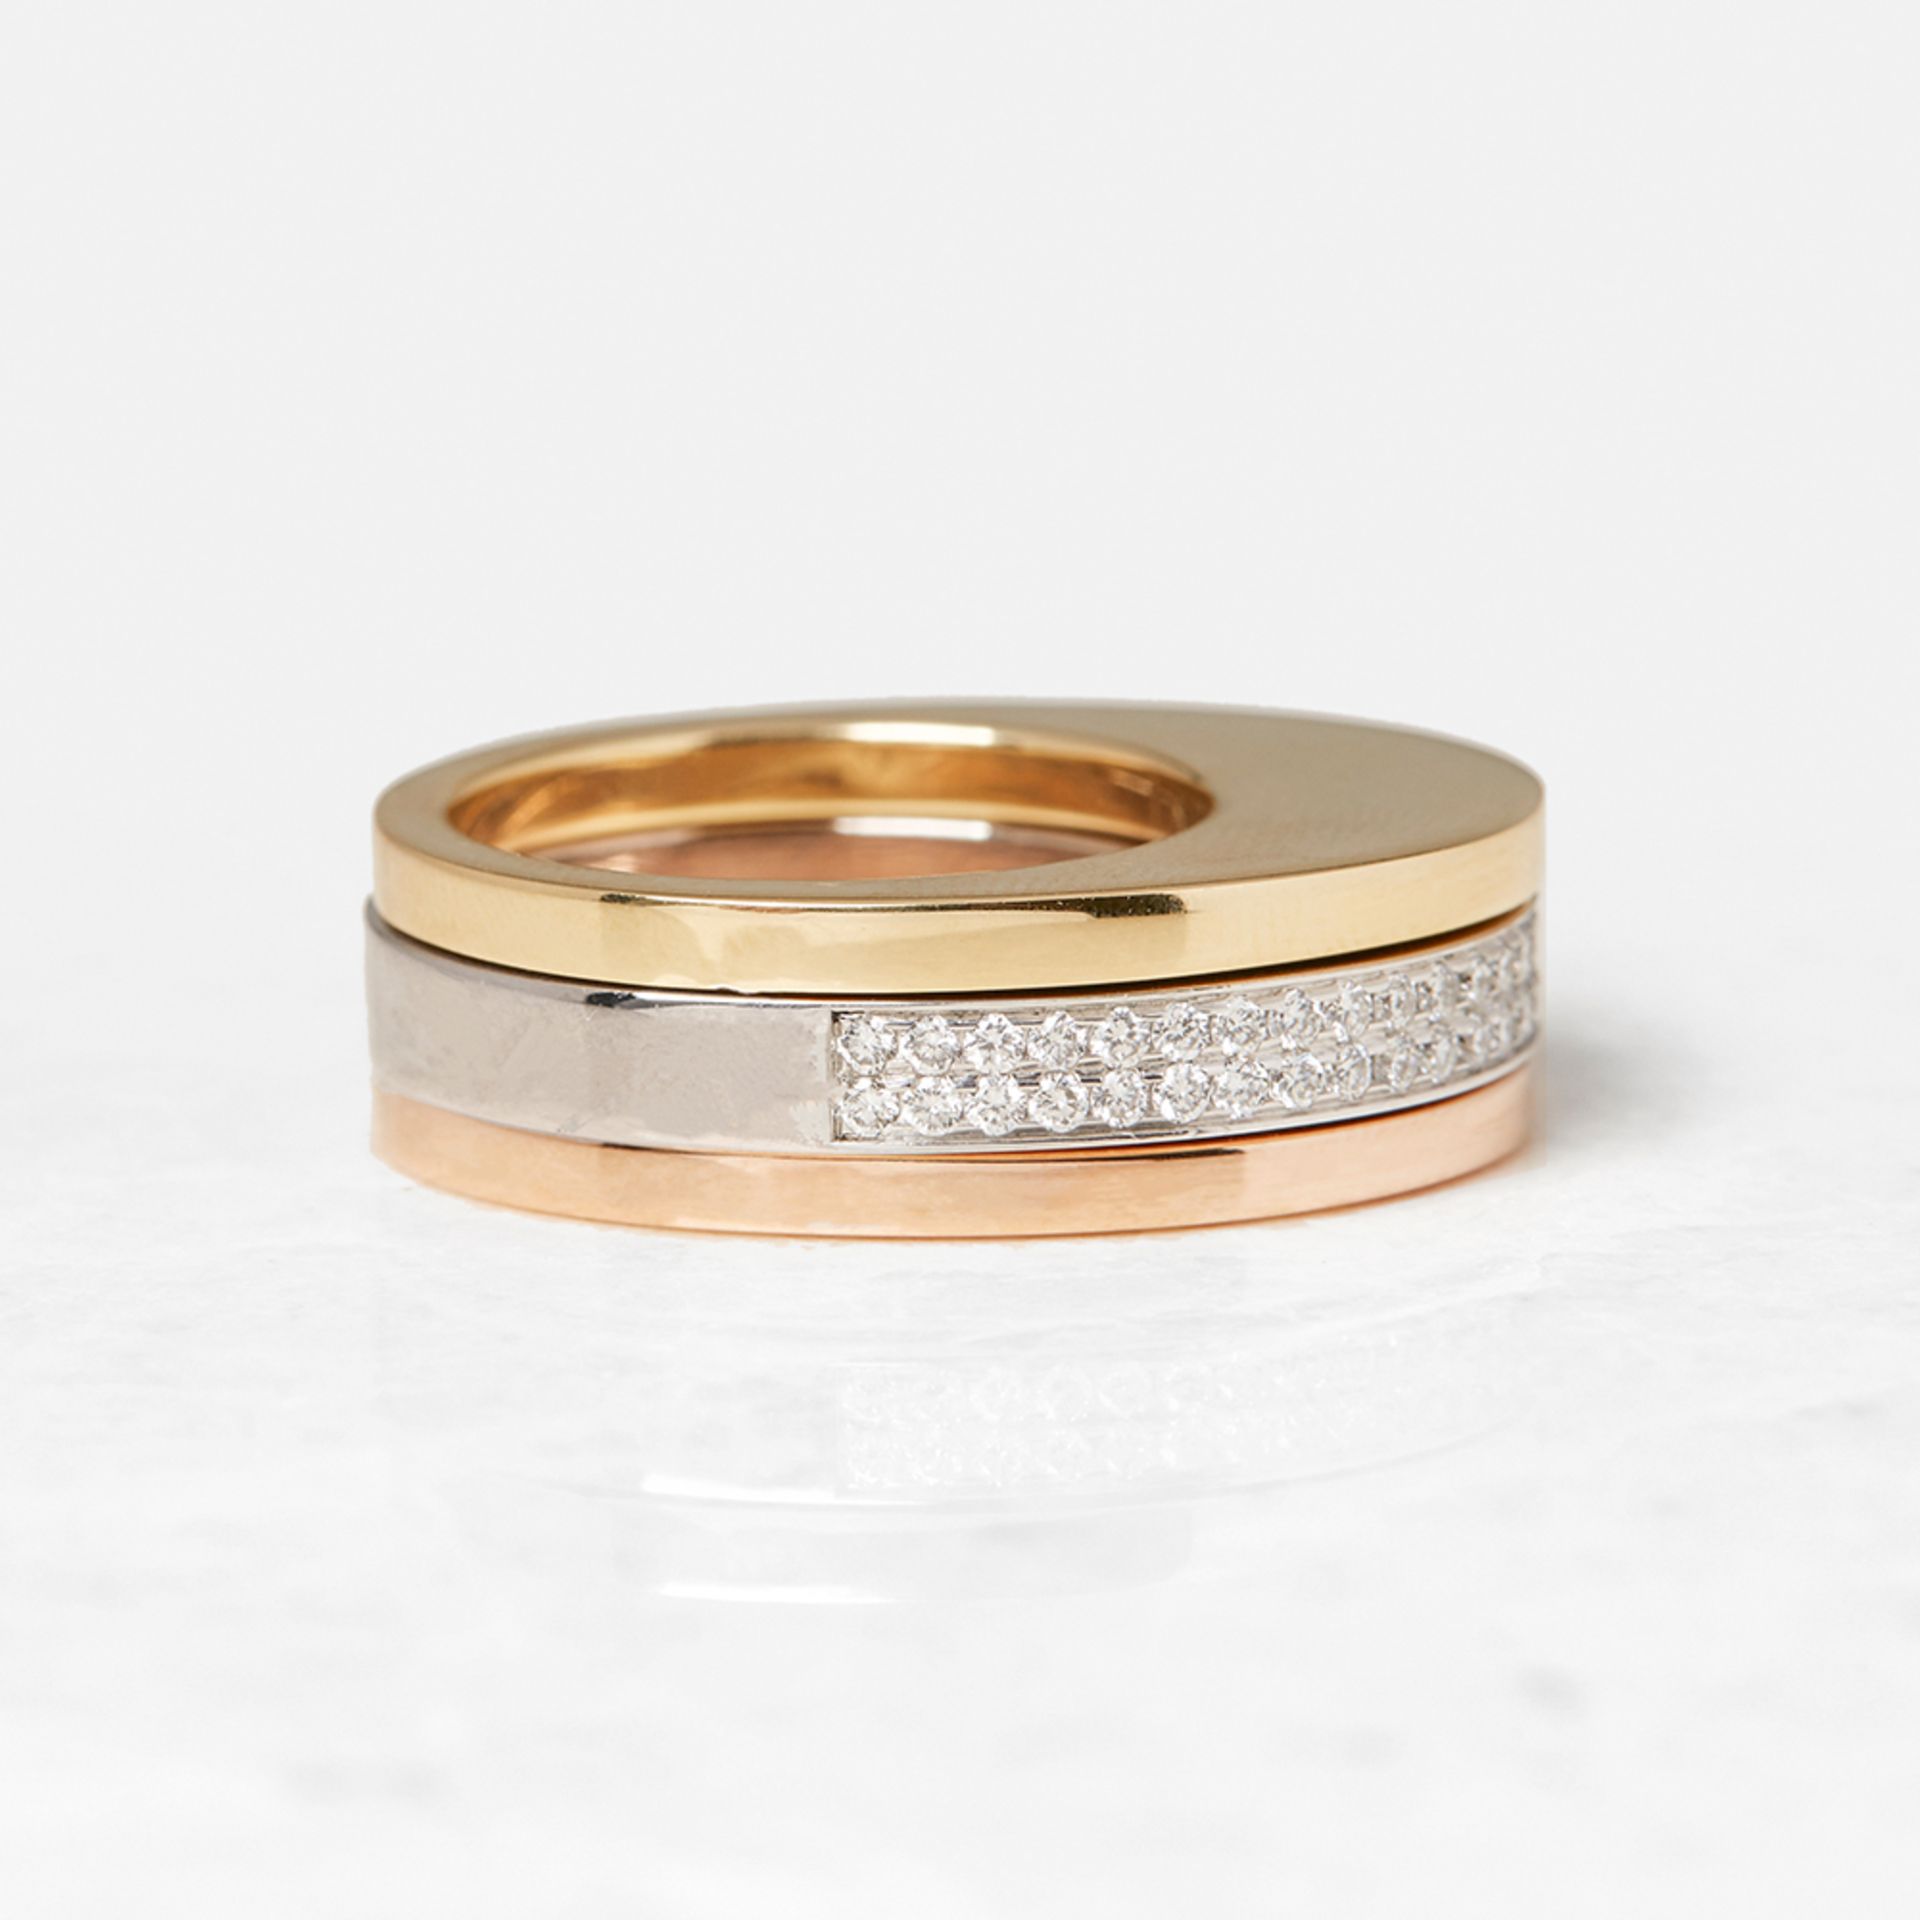 Tiffany & Co. 18k White, Rose & Yellow Gold Stackable Rings - Image 3 of 10